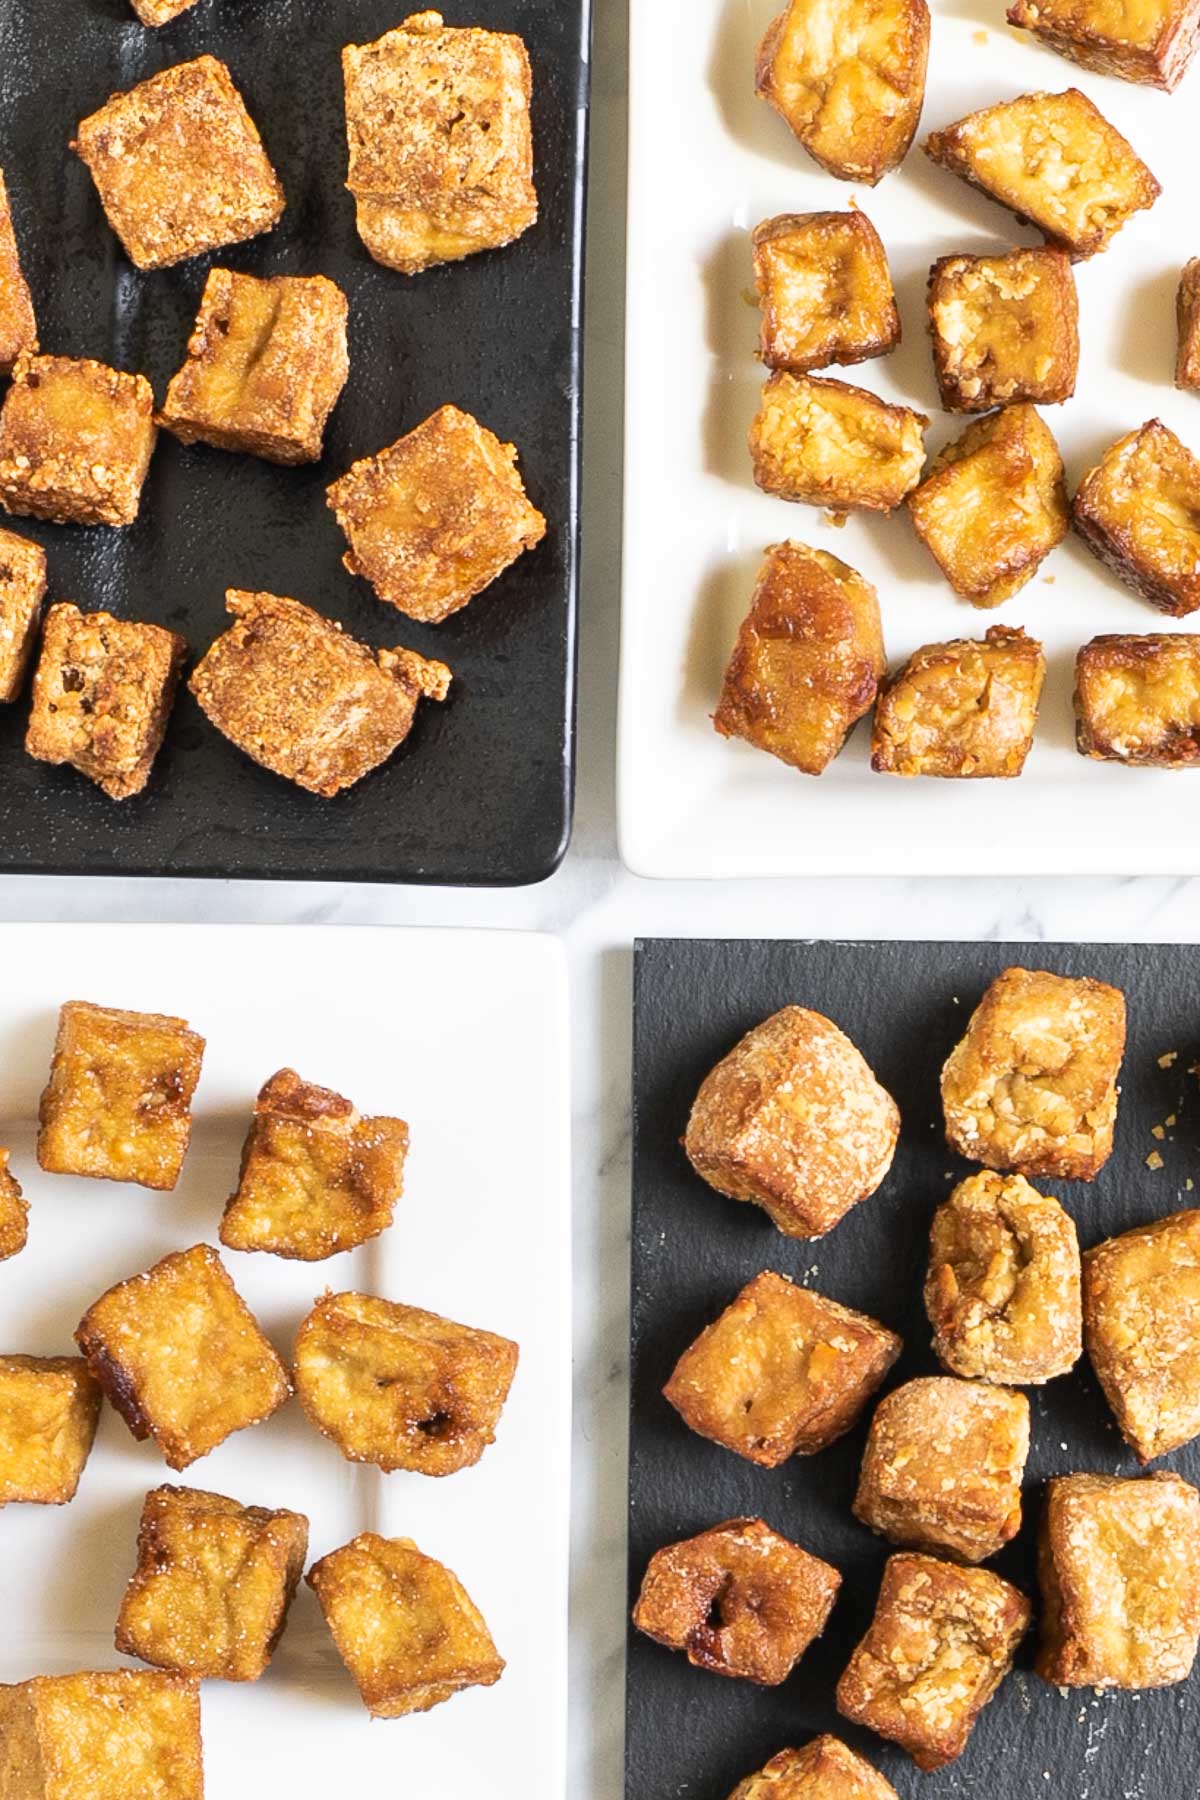 Crispy brown tofu cubes on 4 different plates of white and black.